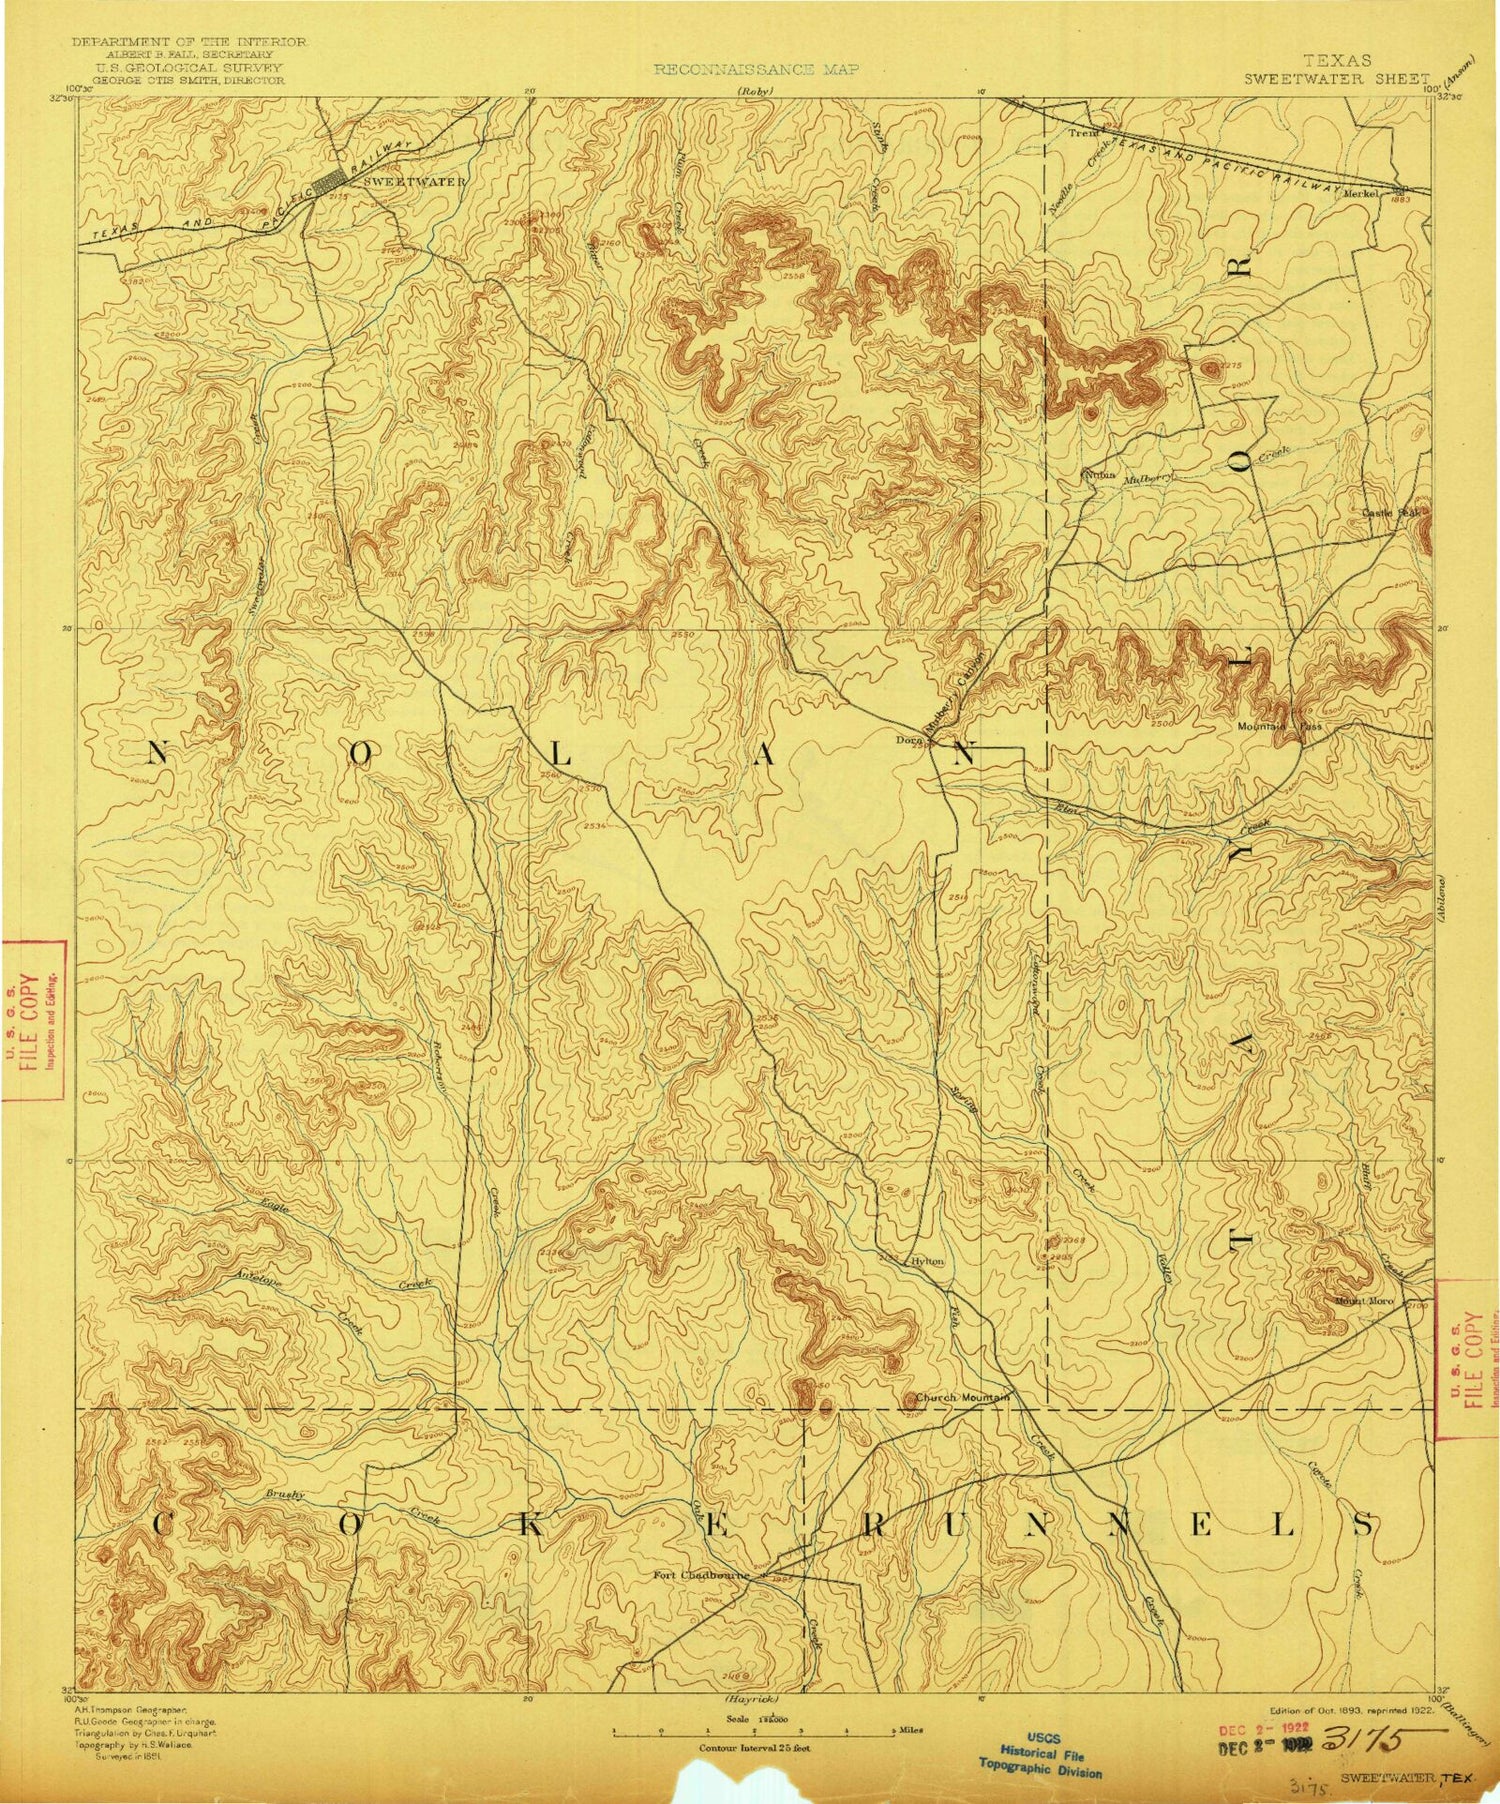 Historic 1893 Sweetwater Texas 30'x30' Topo Map Image